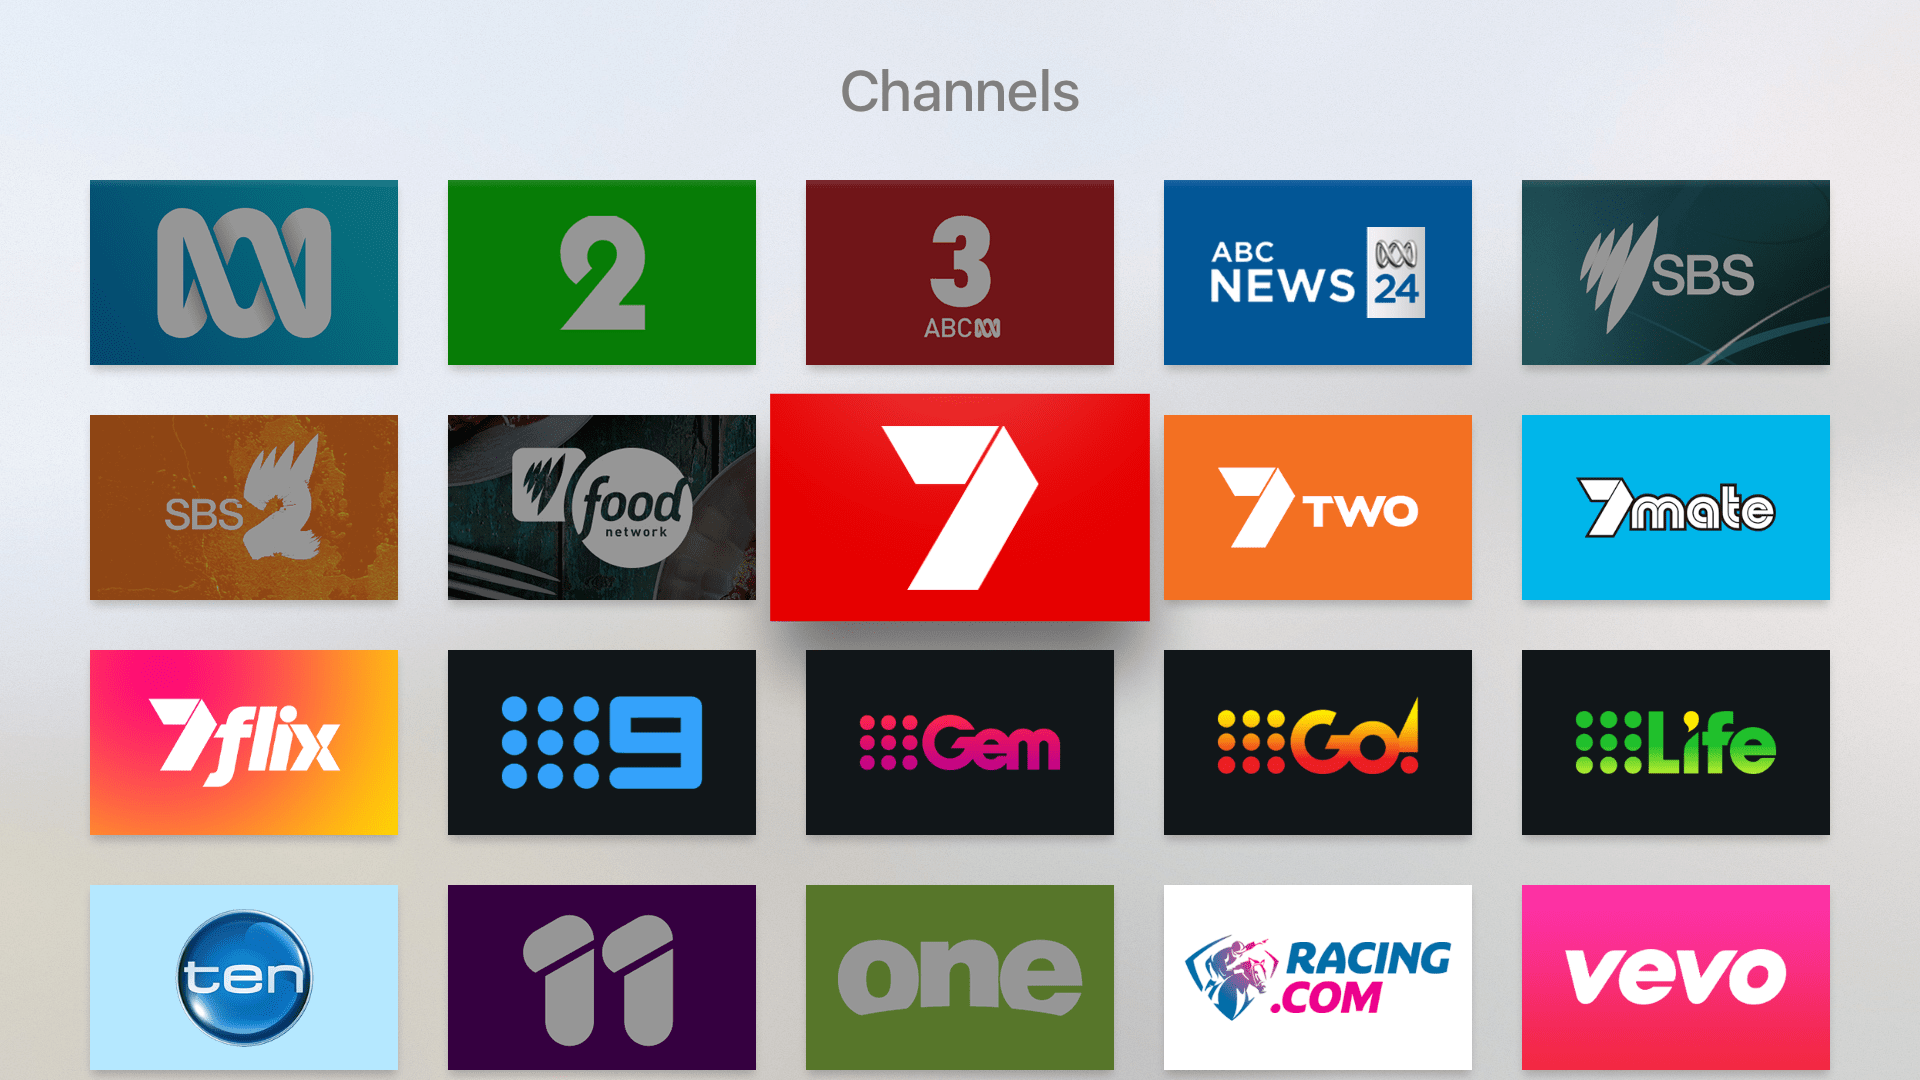 The 'Channels' view in the Streamee Apple TV app, featuring a grid of TV channels